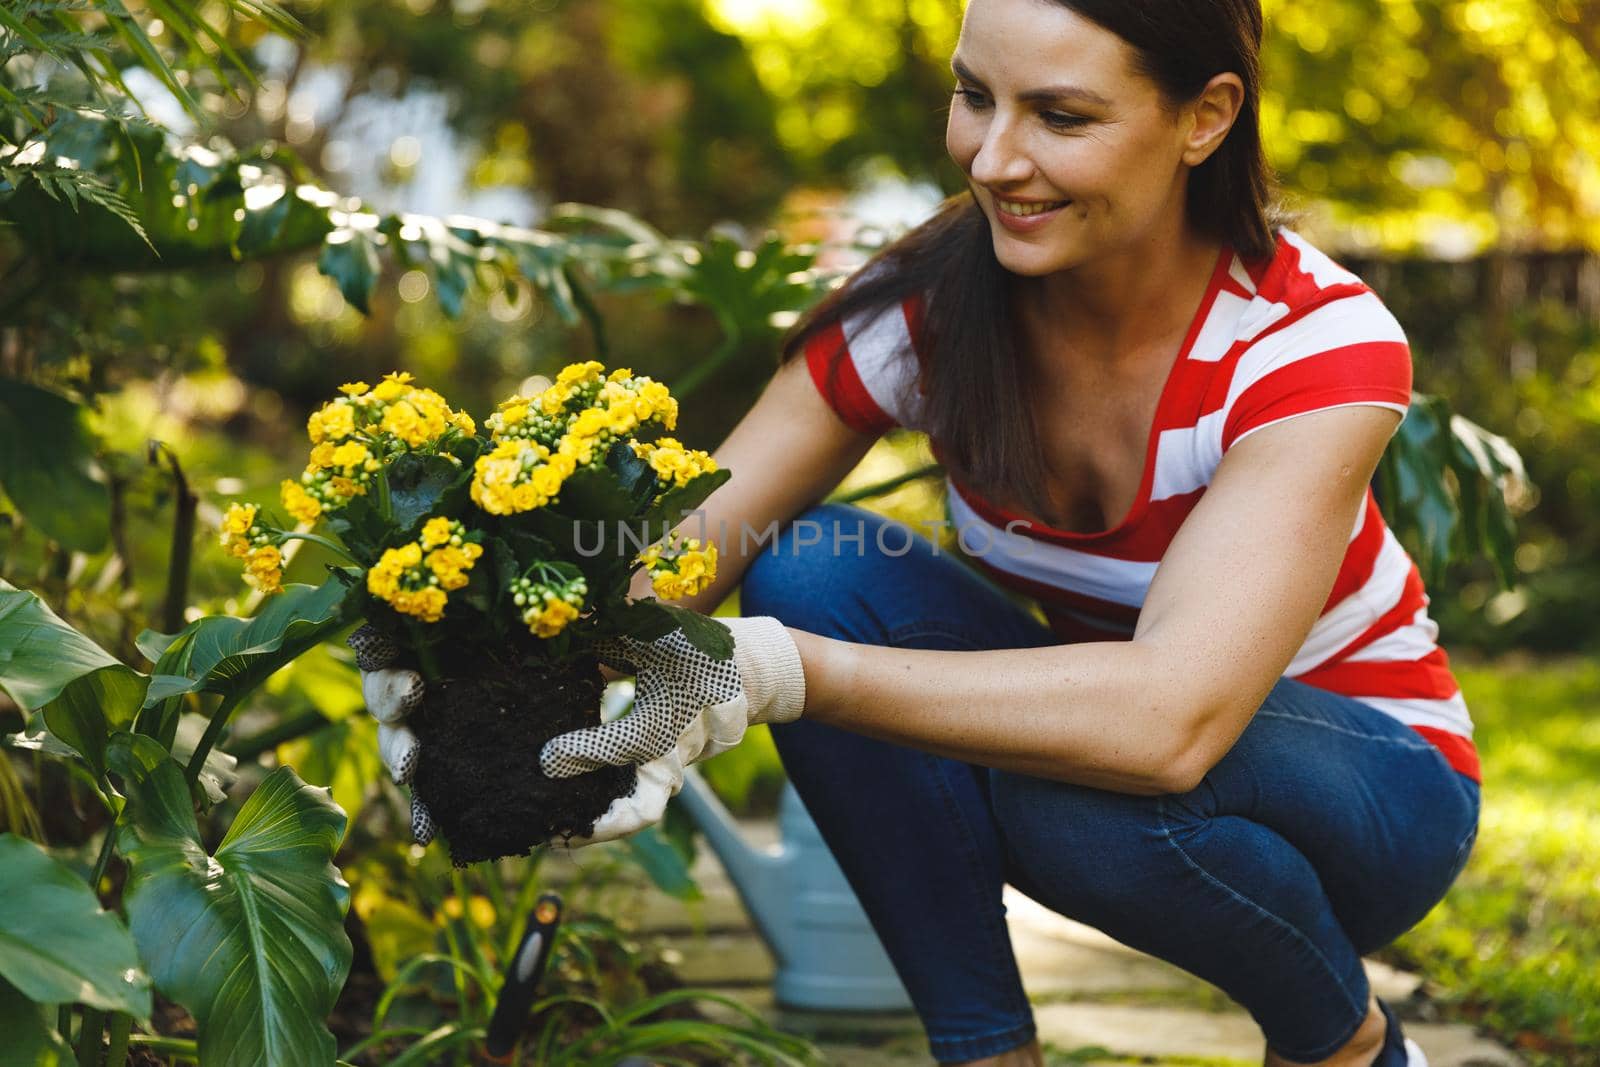 Smiling caucasian woman working in garden, holding flowers and wearing gloves. family enjoying leisure time together gardening at home.